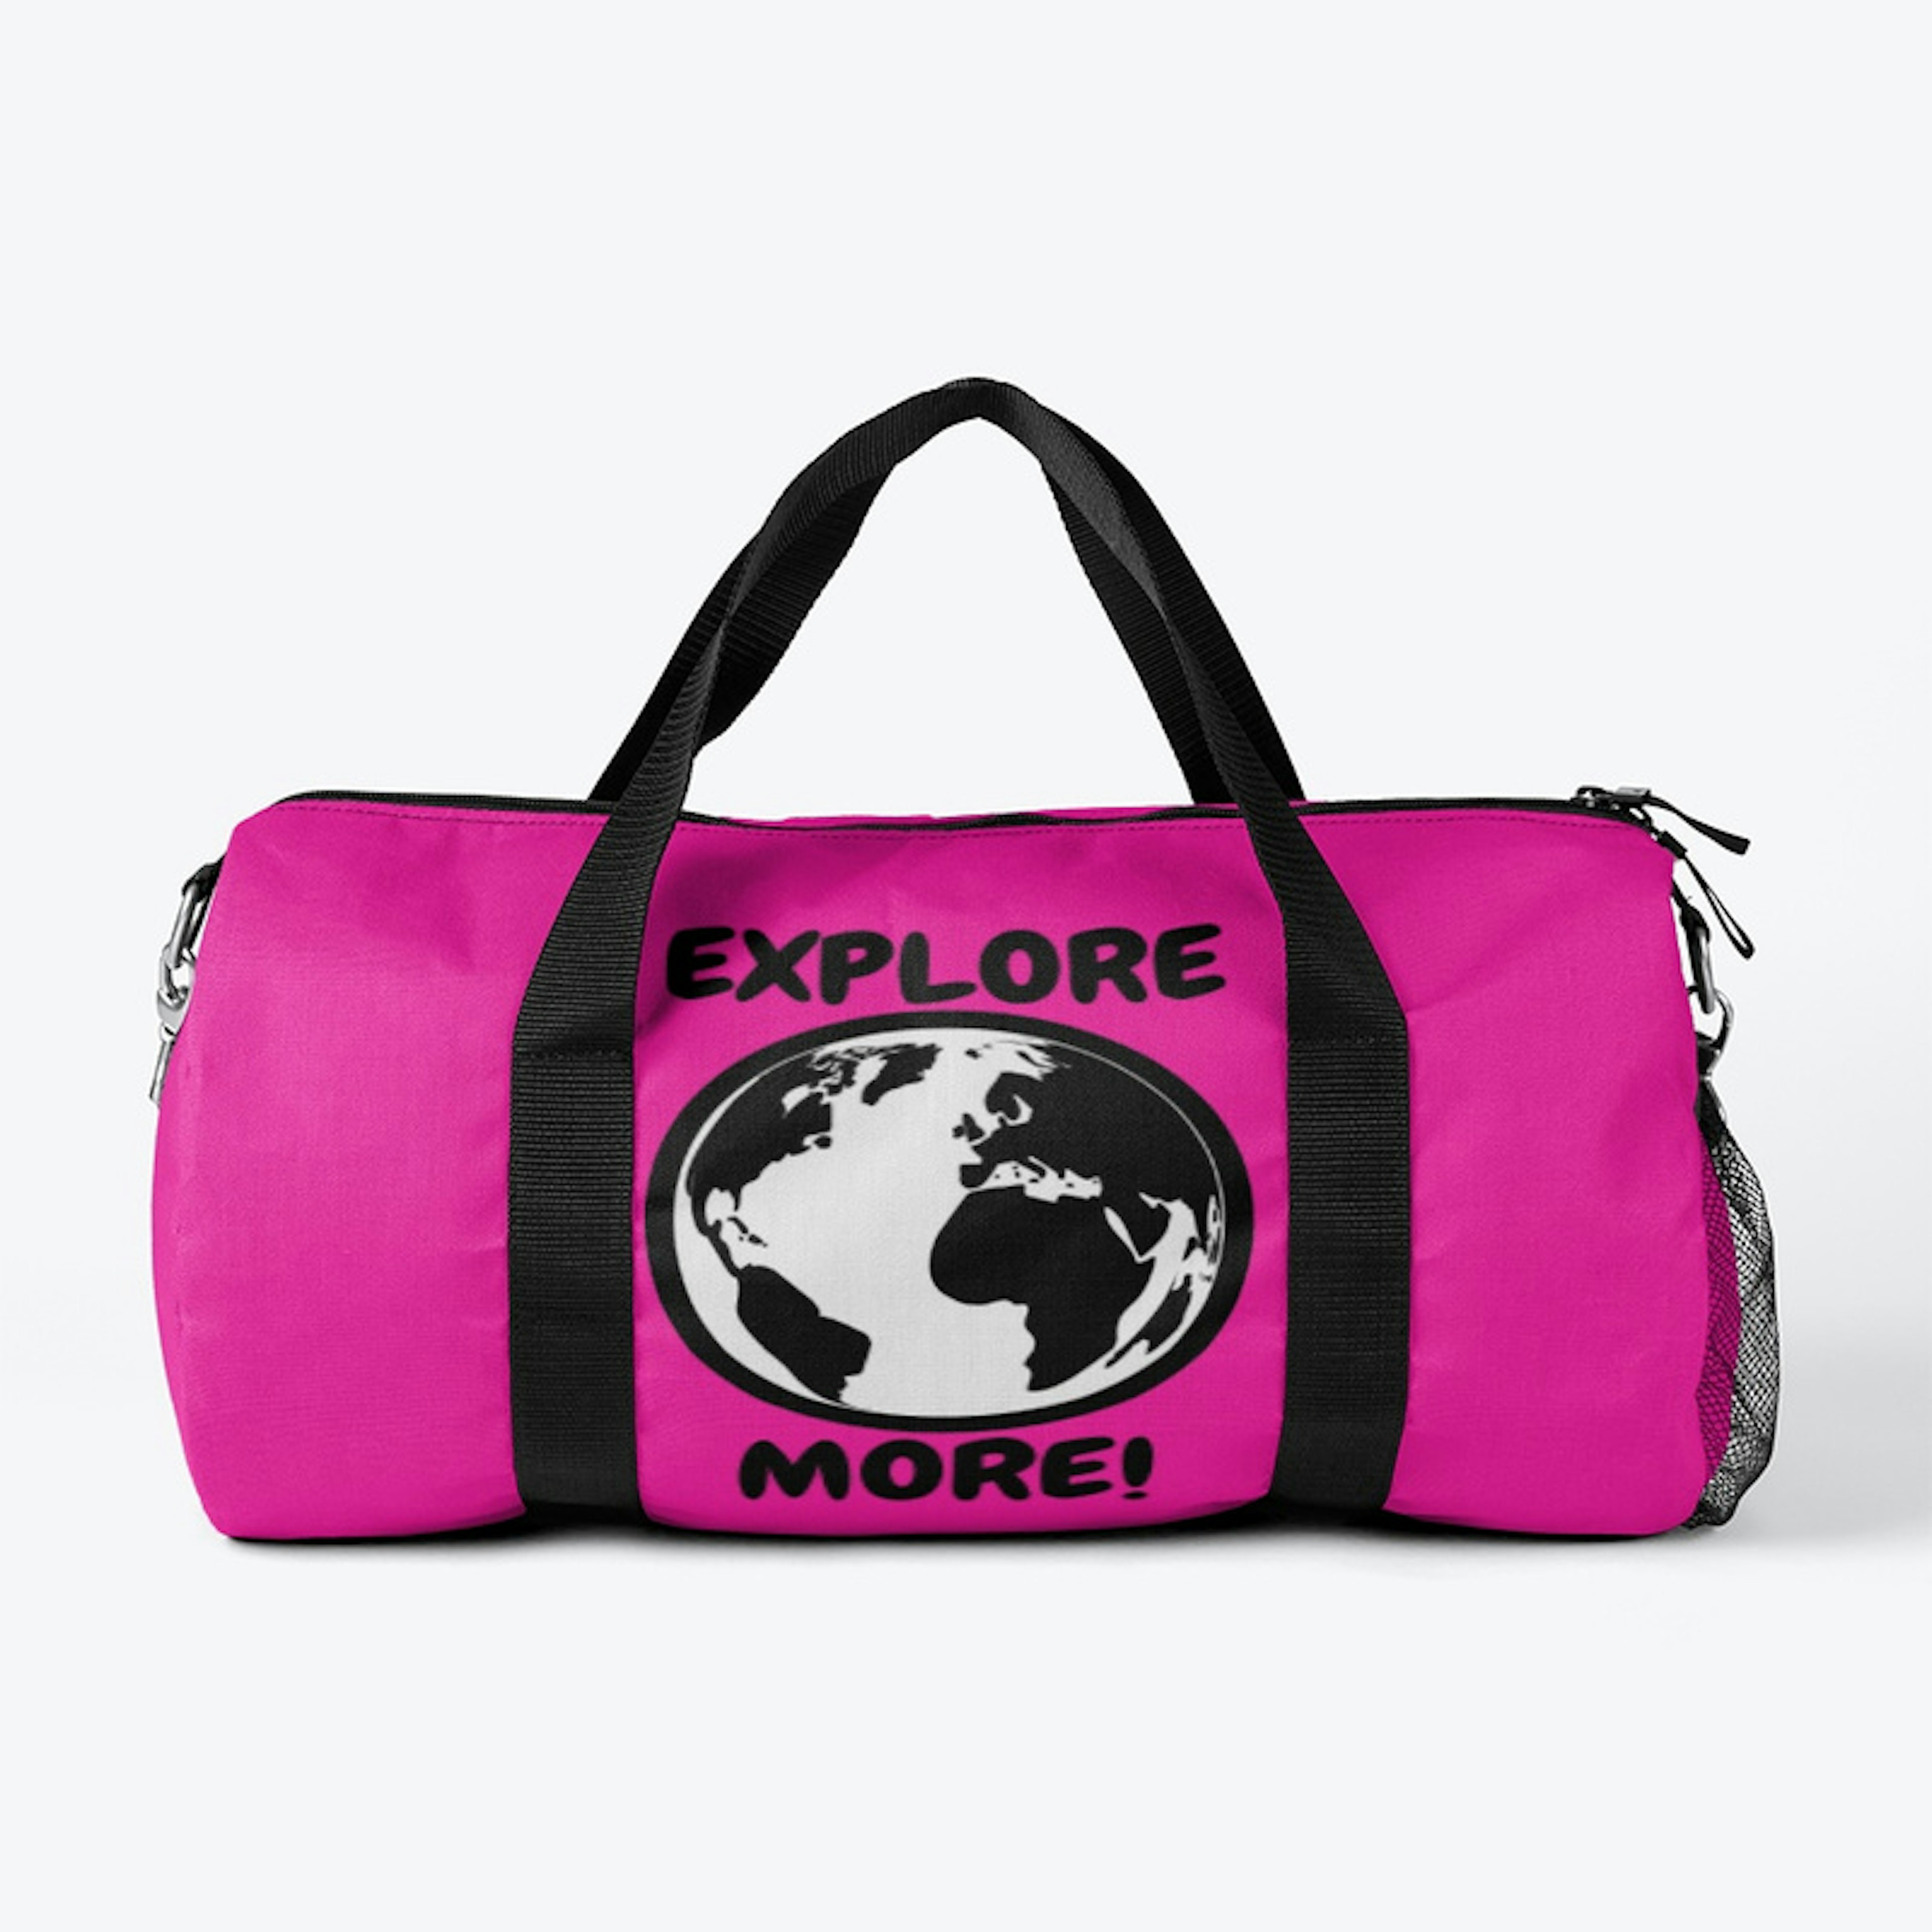 Explore More Carry-on Duffle Bag